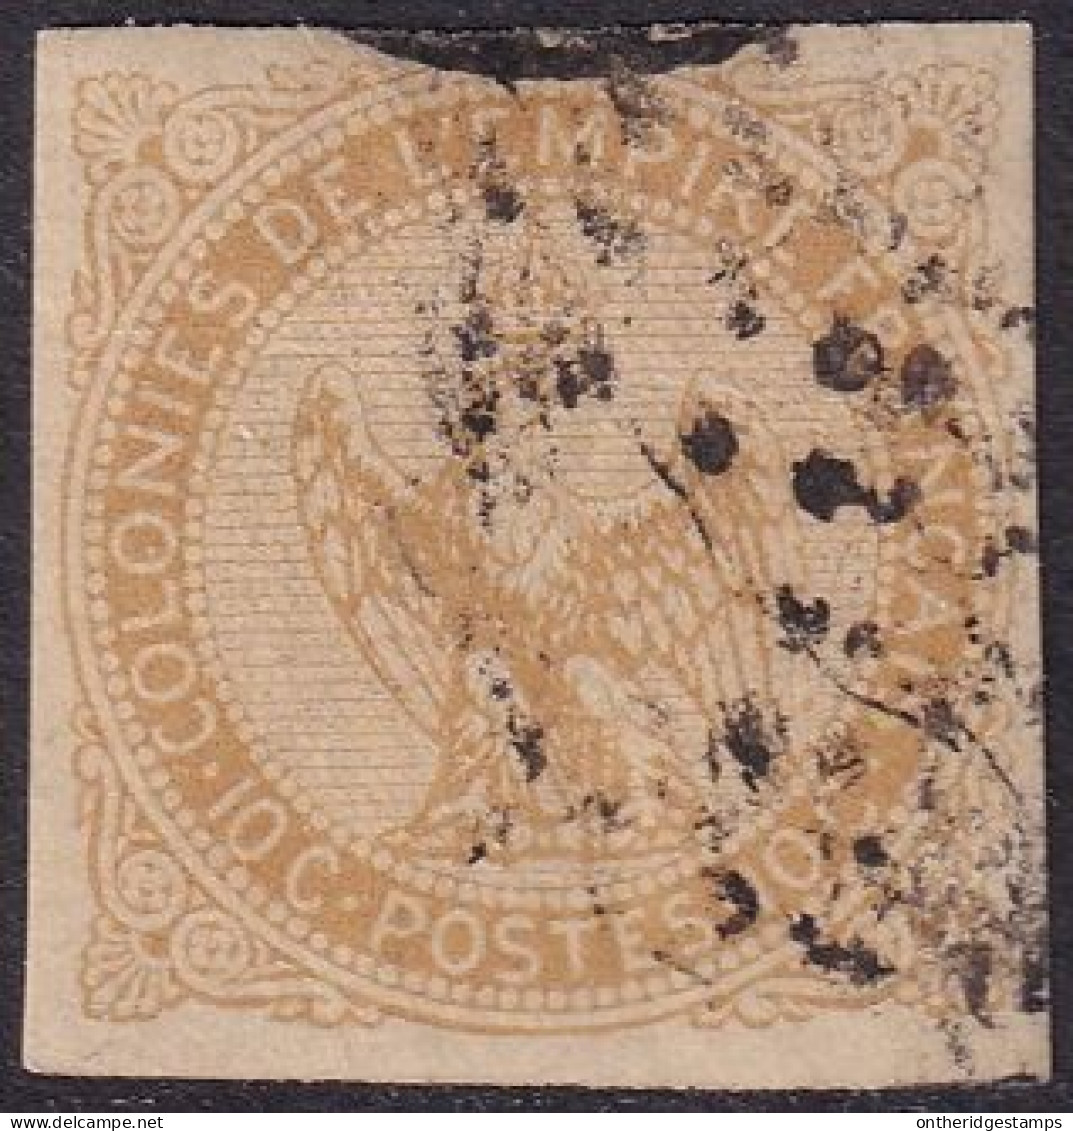 French Colonies 1859 Sc 3 Yt 3 Used Lozenge Cancel Paper Adhesion - Keizerarend